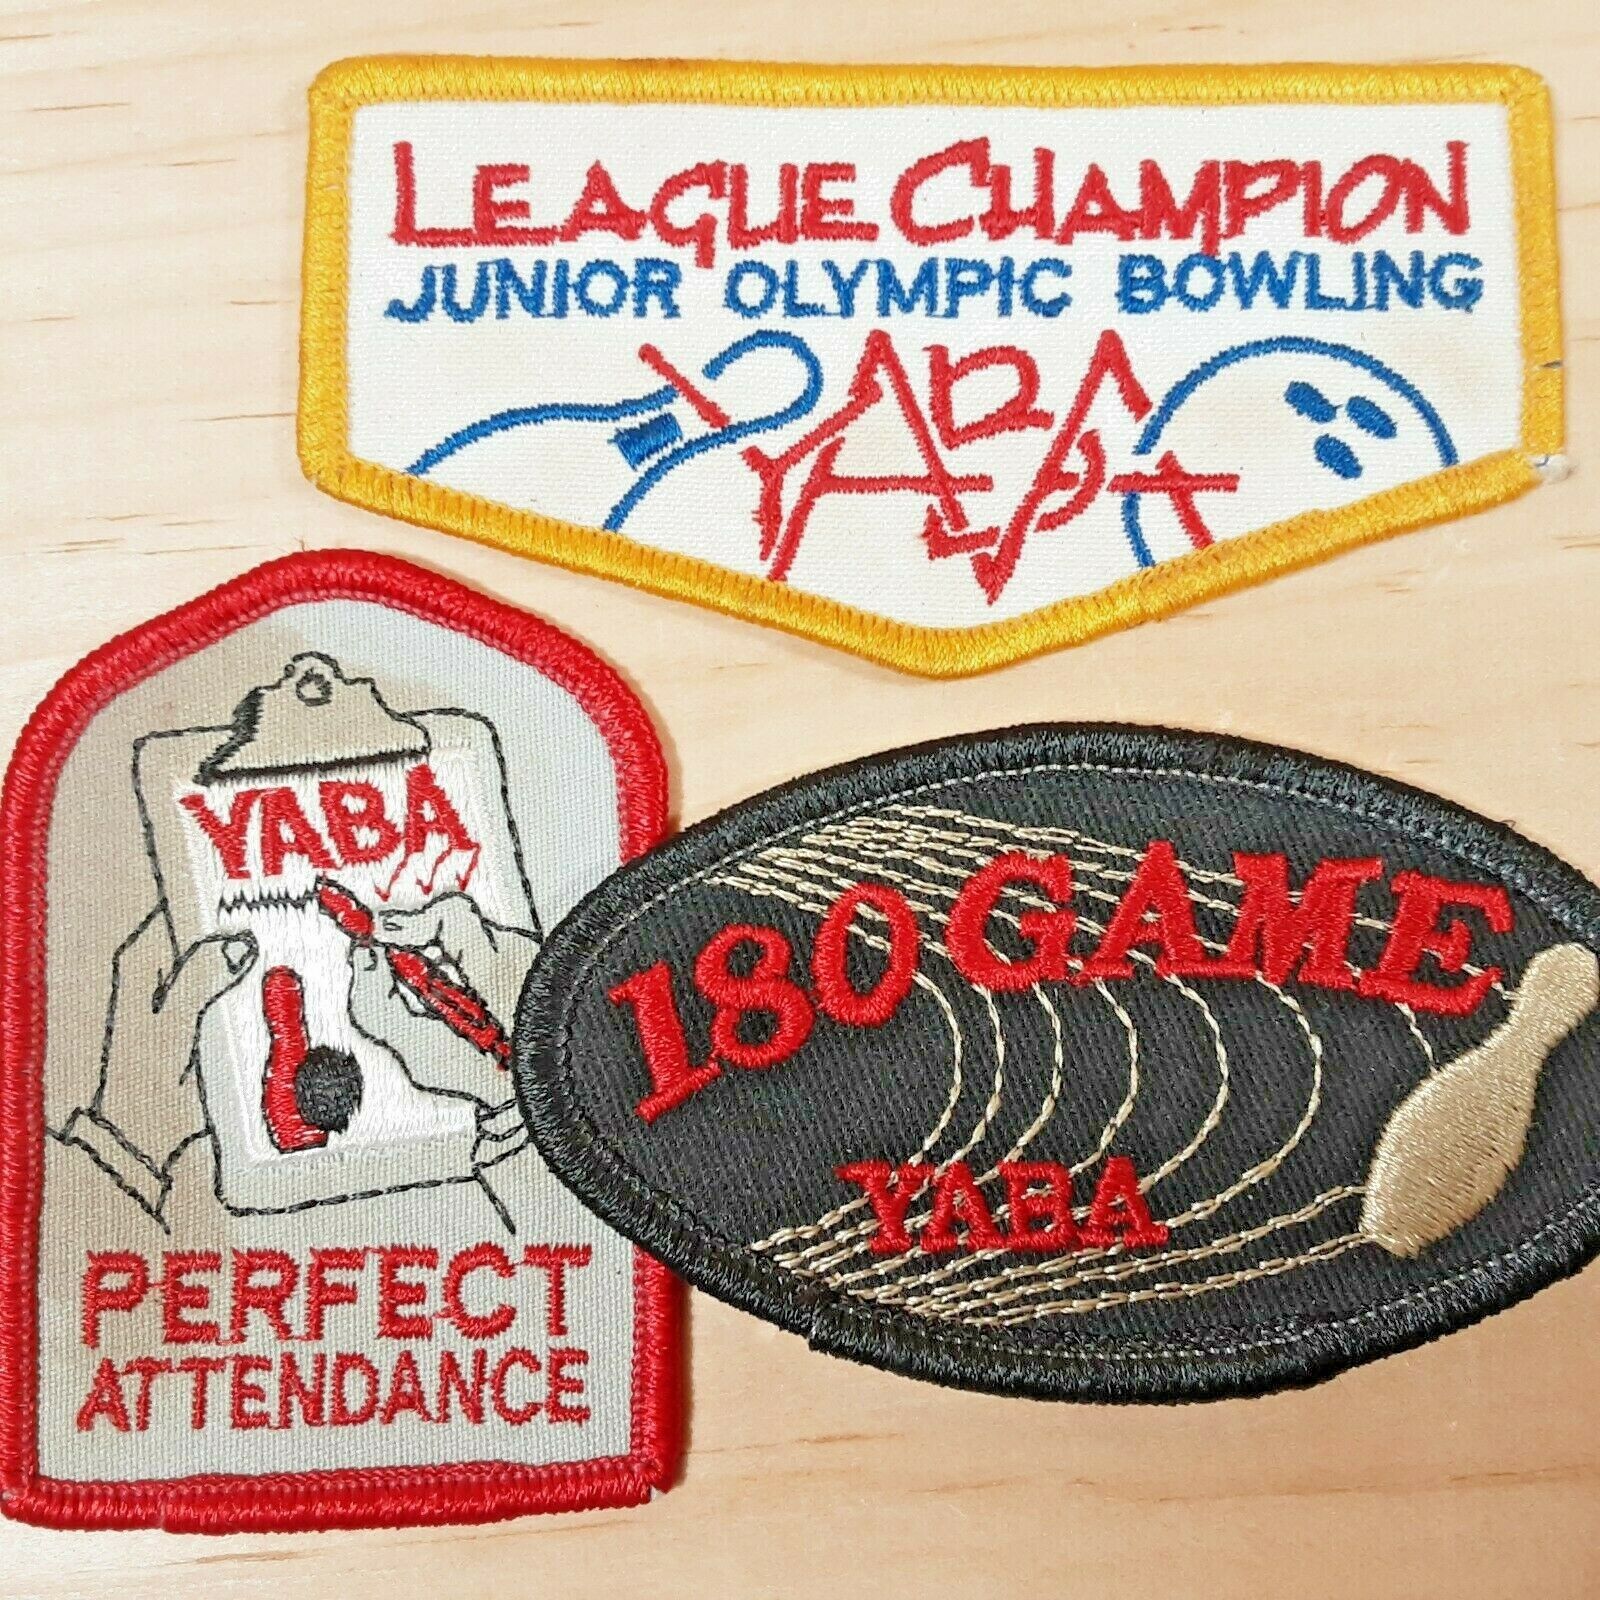 Vintage Bowling Patches Yaba Junior Olympic Bowling Champion 180 Game